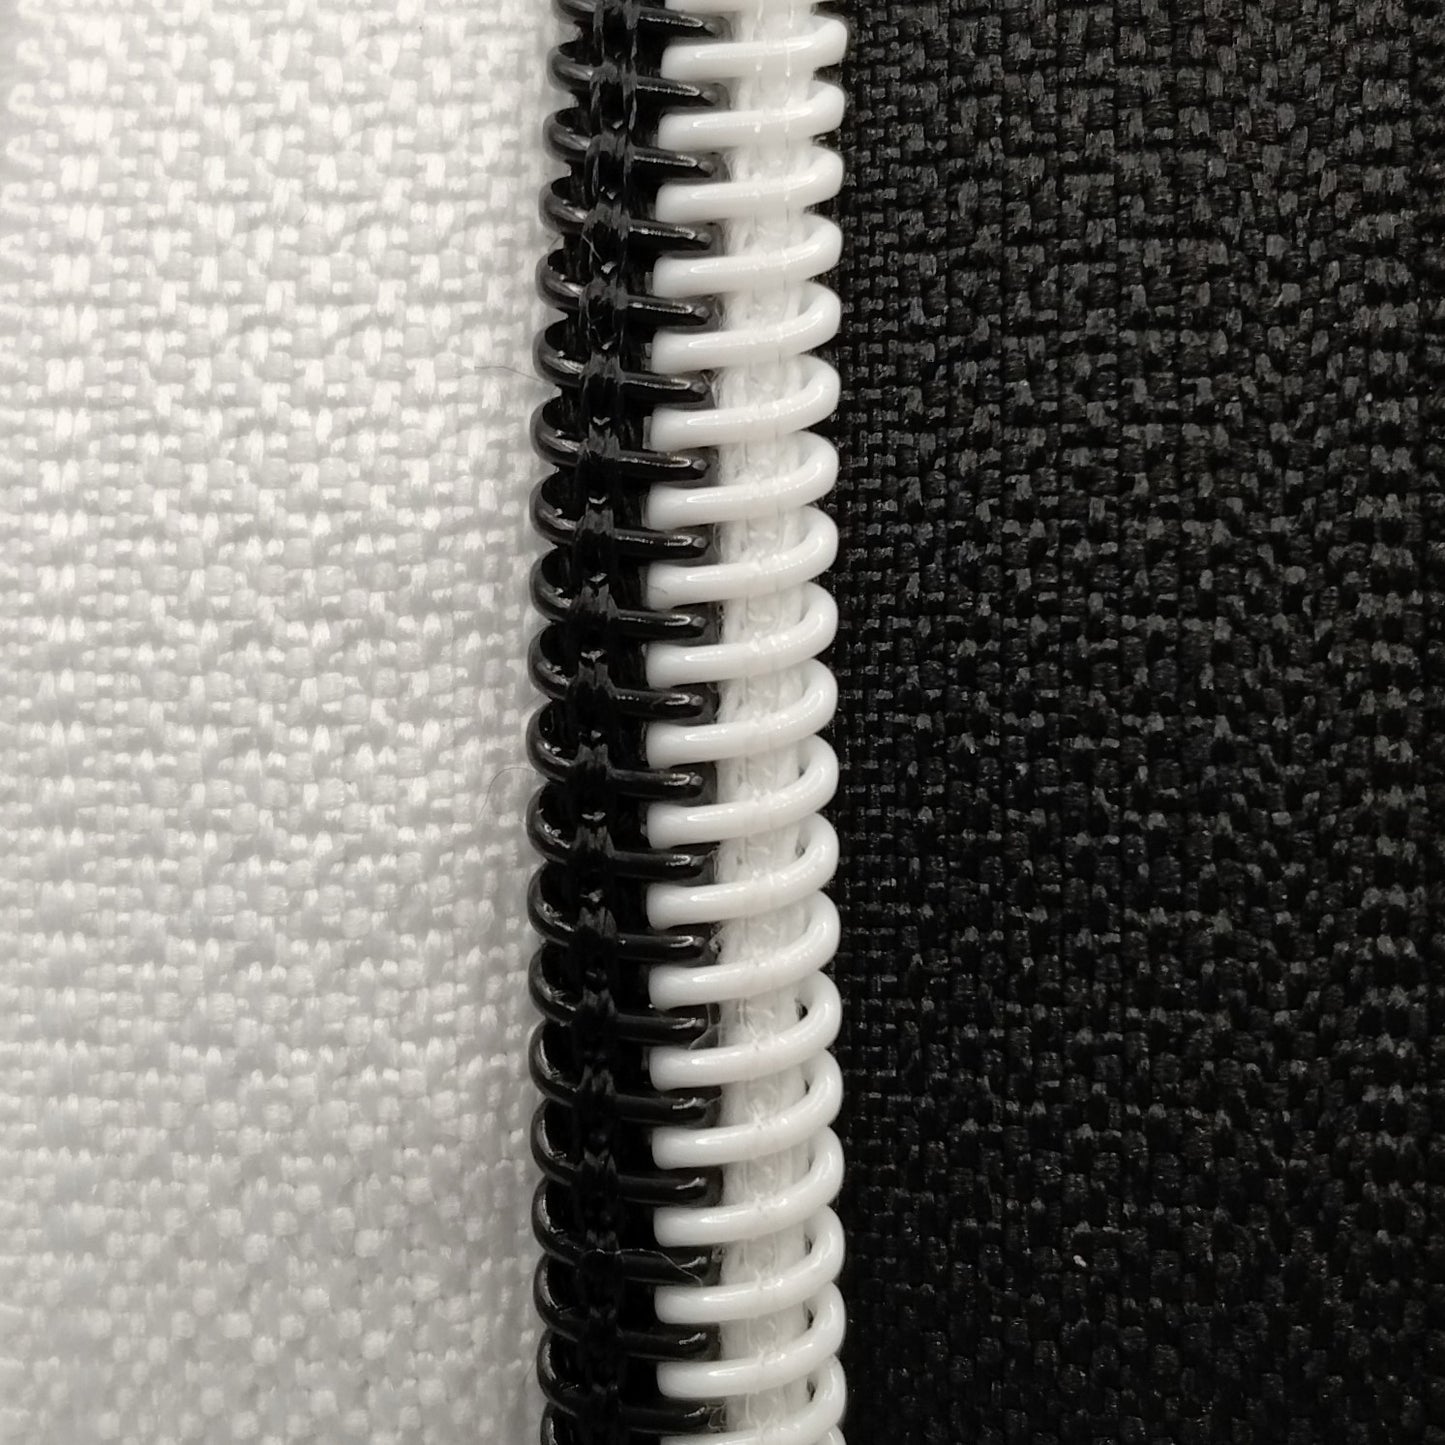 #5 Zipper - Half and Half, Black and White with Alternating Teeth - by the meter Atelier Fiber Arts